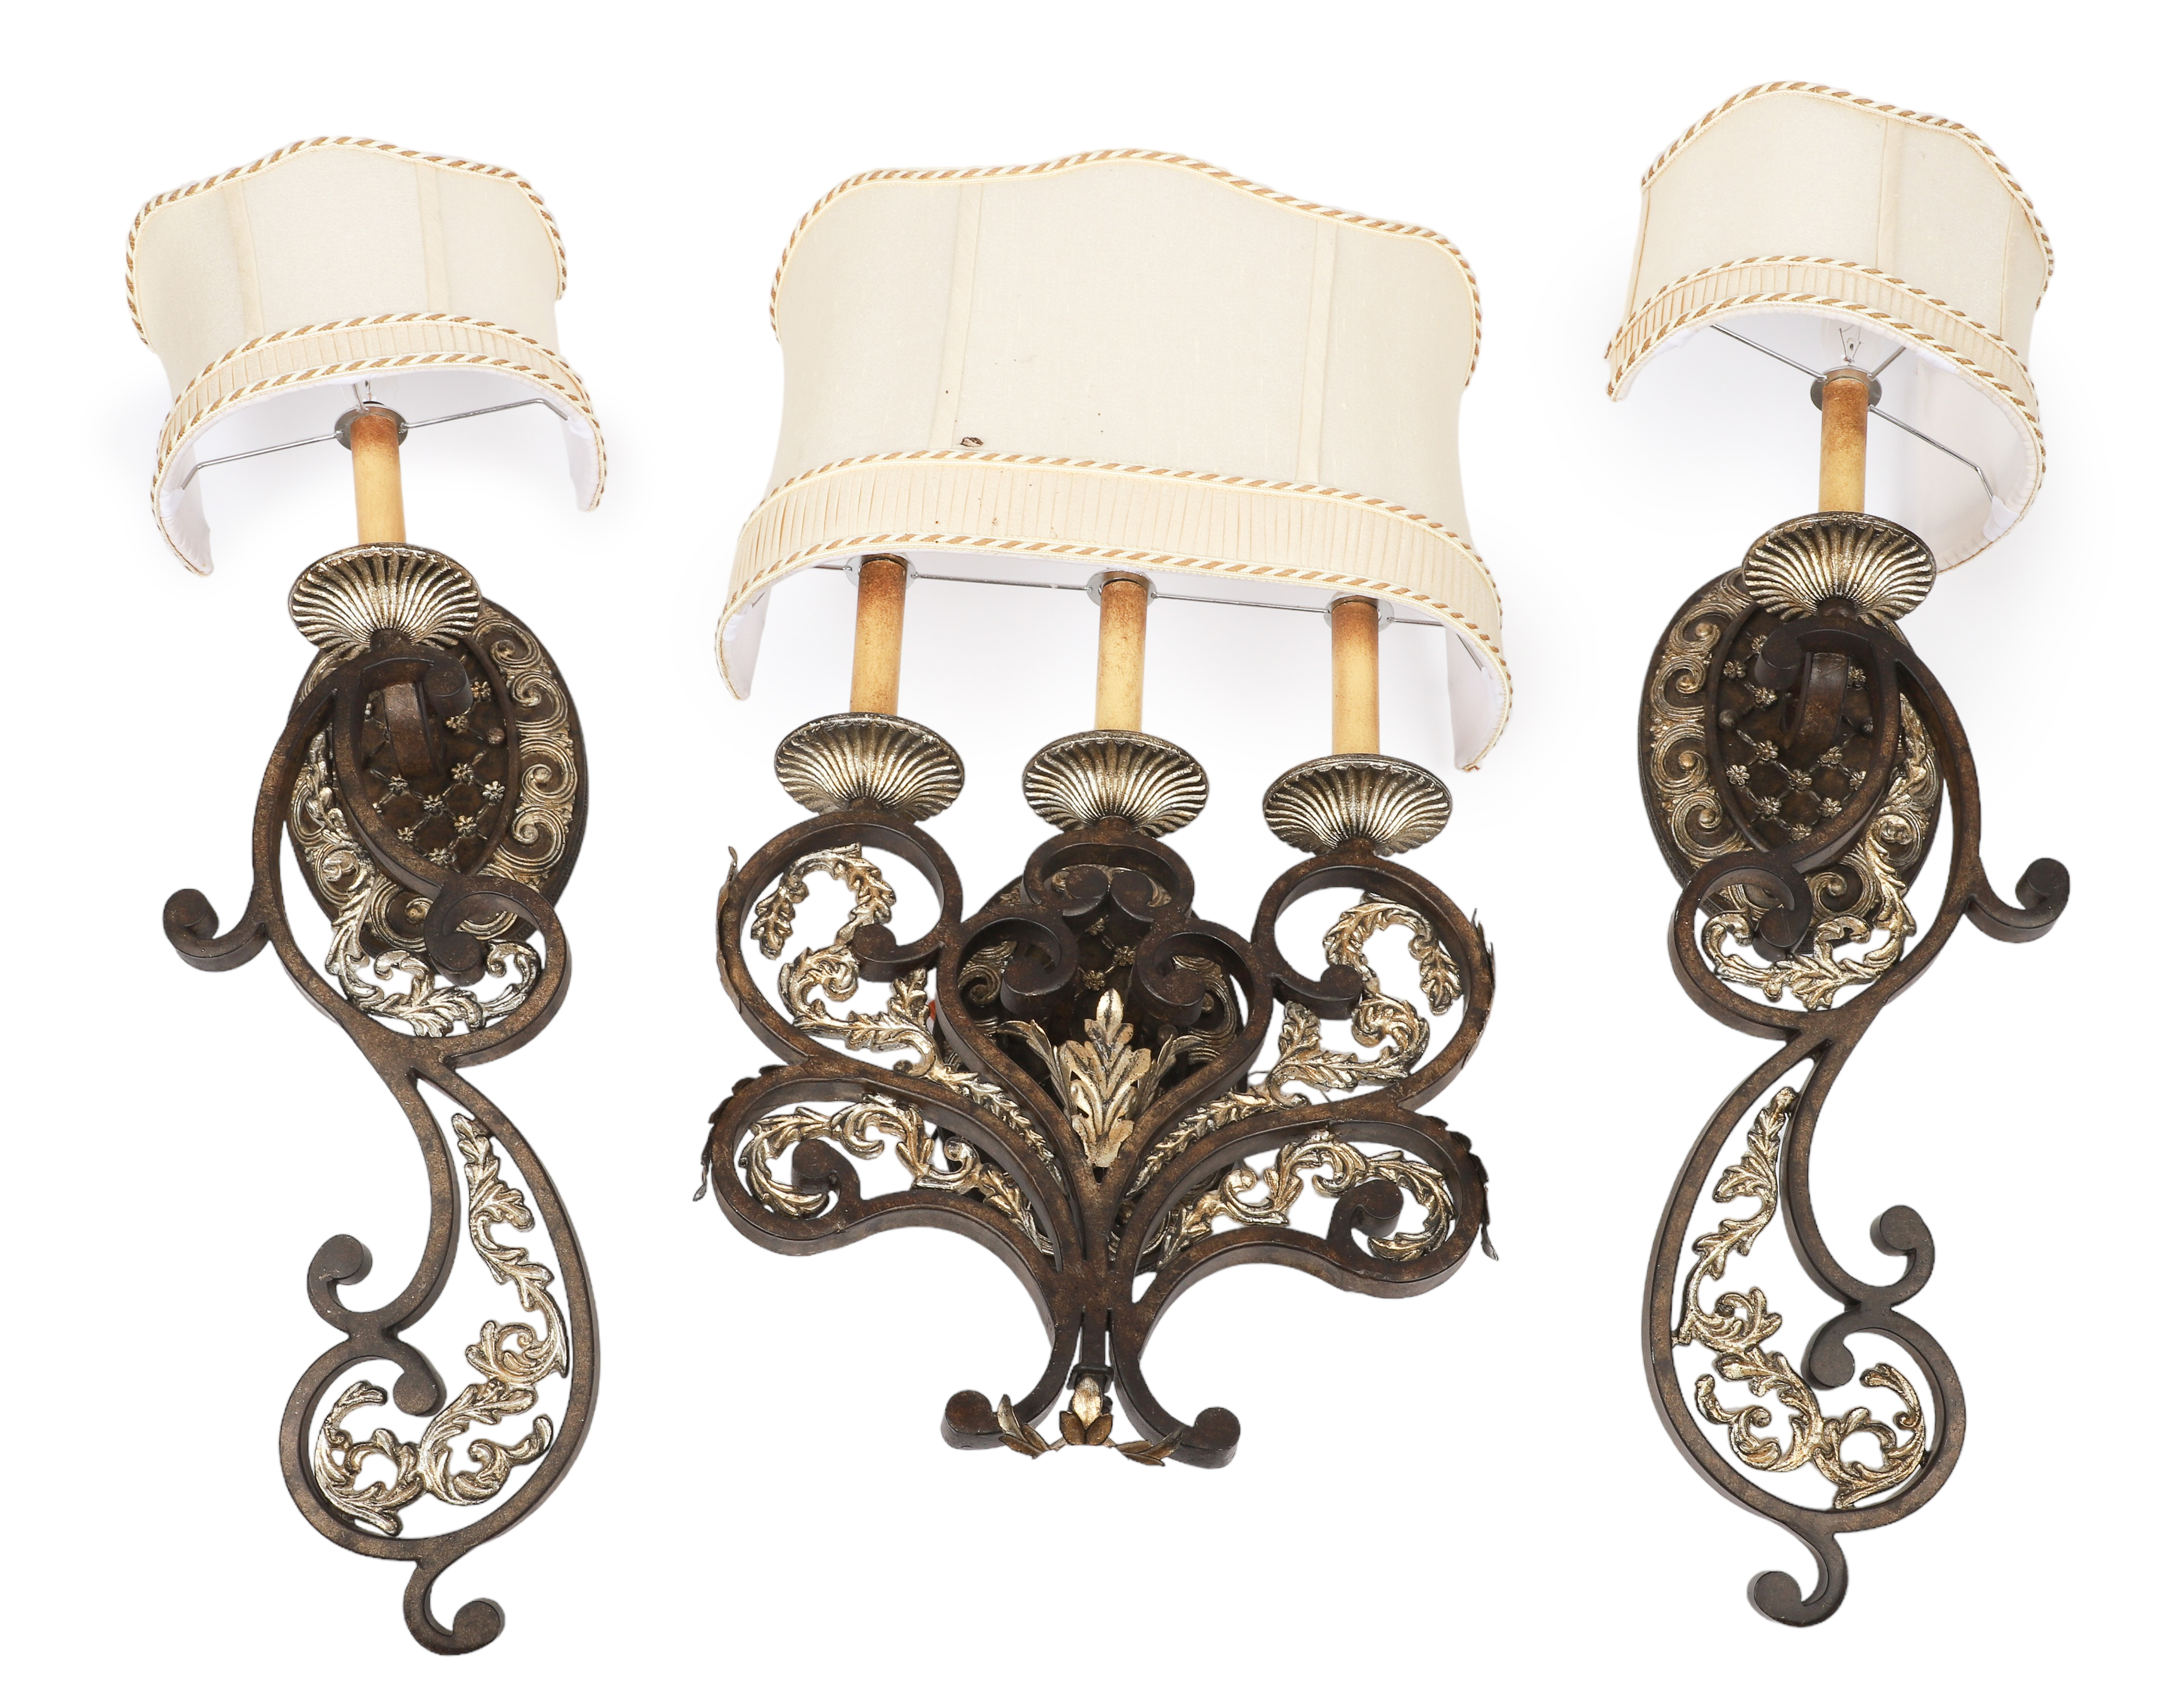 Trio of decorative wall sconce 3b1b3d